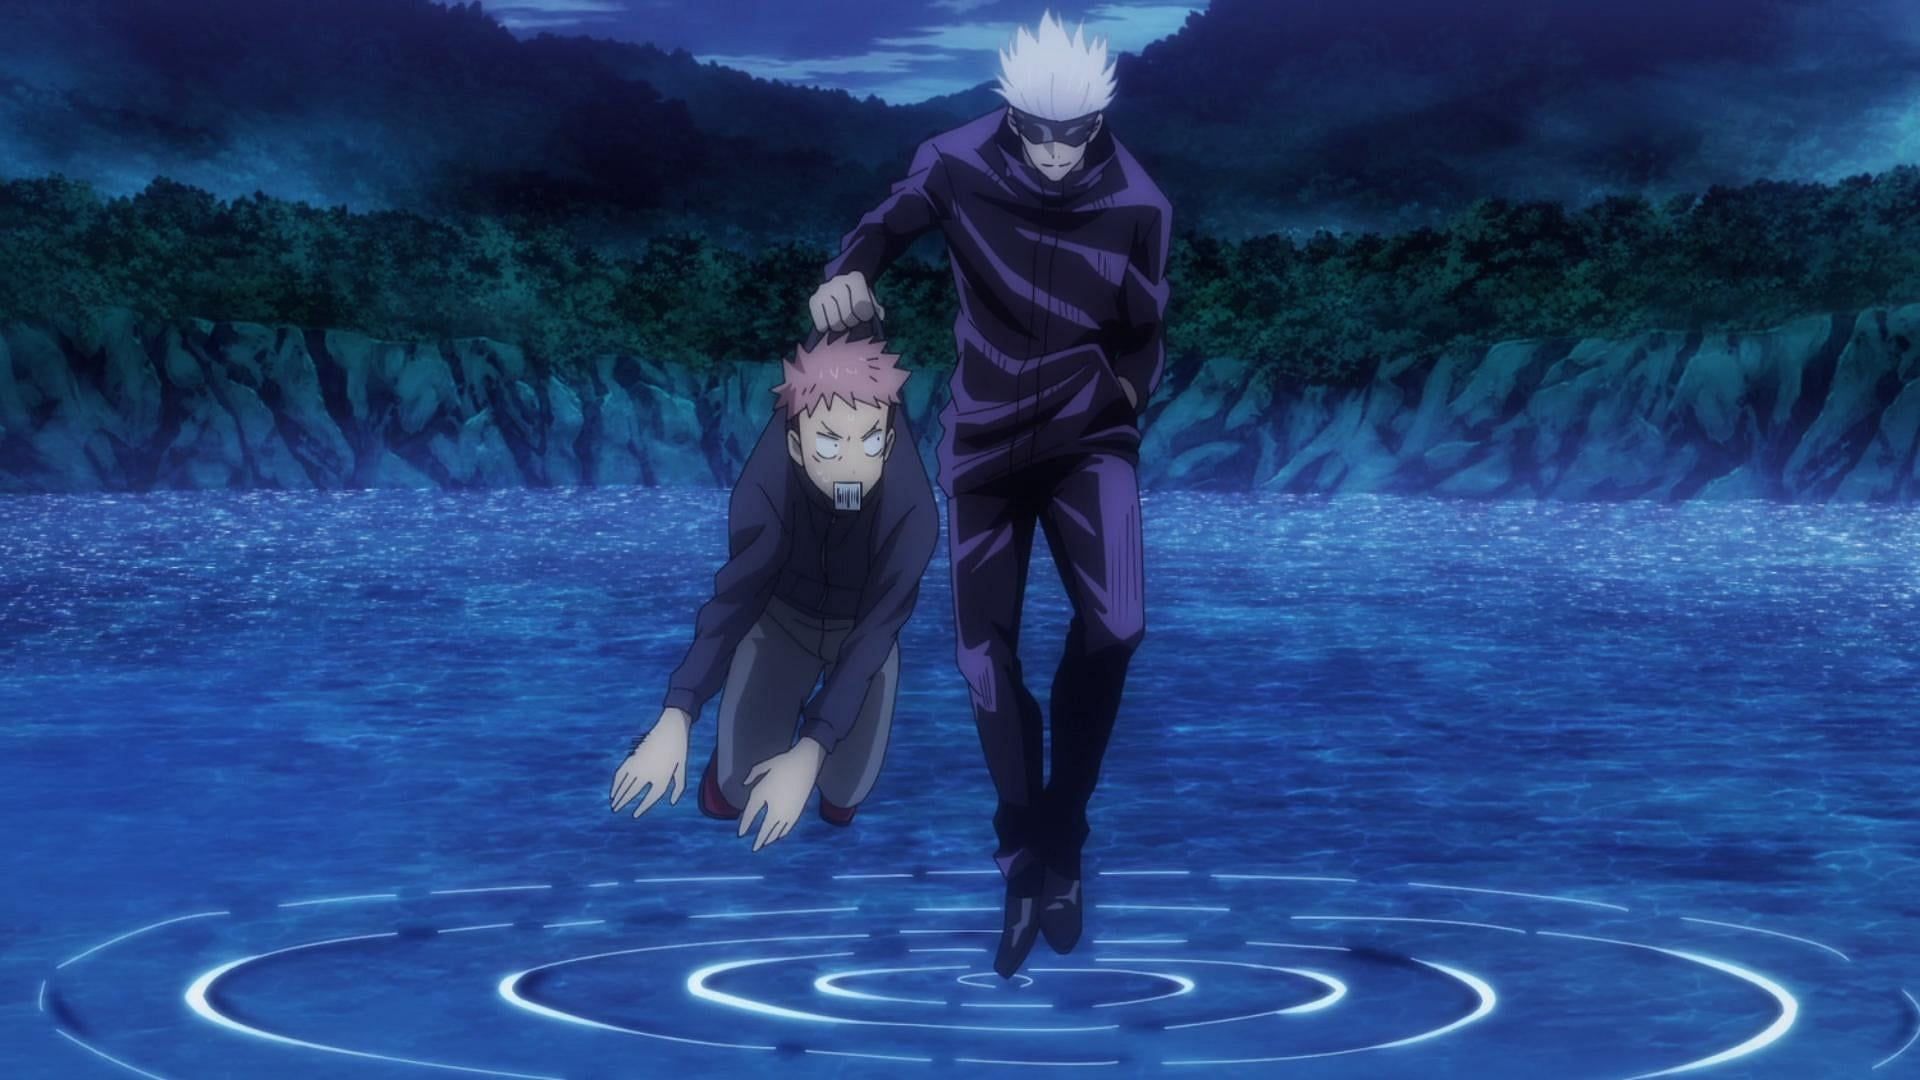 Akutami destroyed the most wholesome Gojo-Yuji moment in Jujutsu Kaisen with the latest reveal (Image via MAPPA Studios)